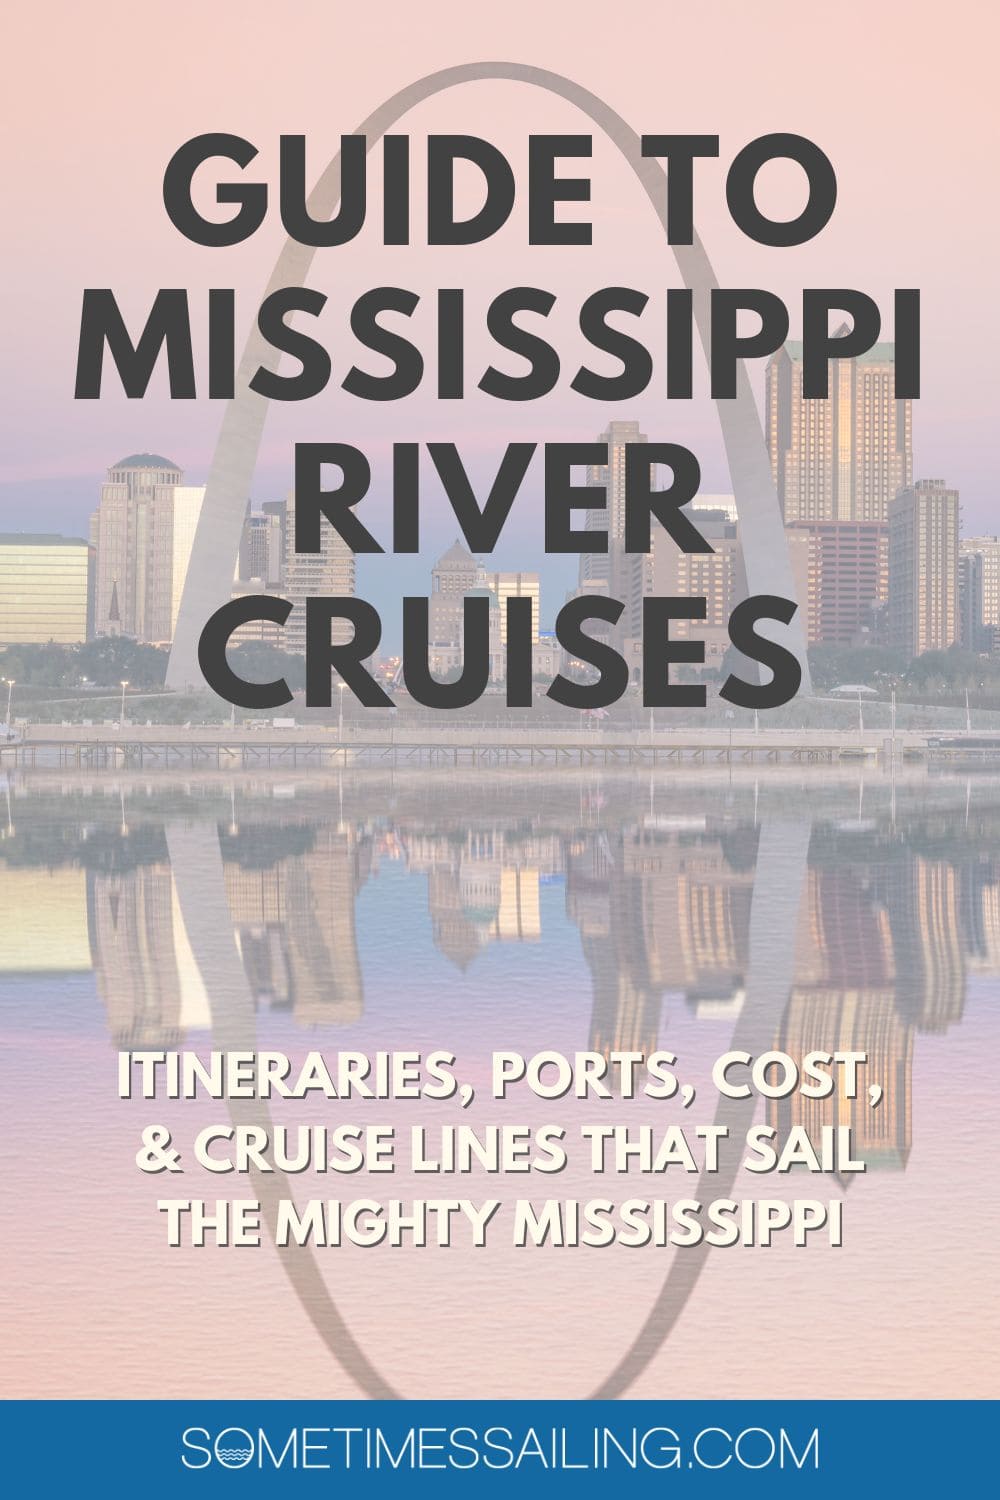 Guide to Mississippi River Cruises - itineraries, ports, cost and cruise lines that sail the Mighty Mississippi, with a picture of the St. Louis arch behind it.